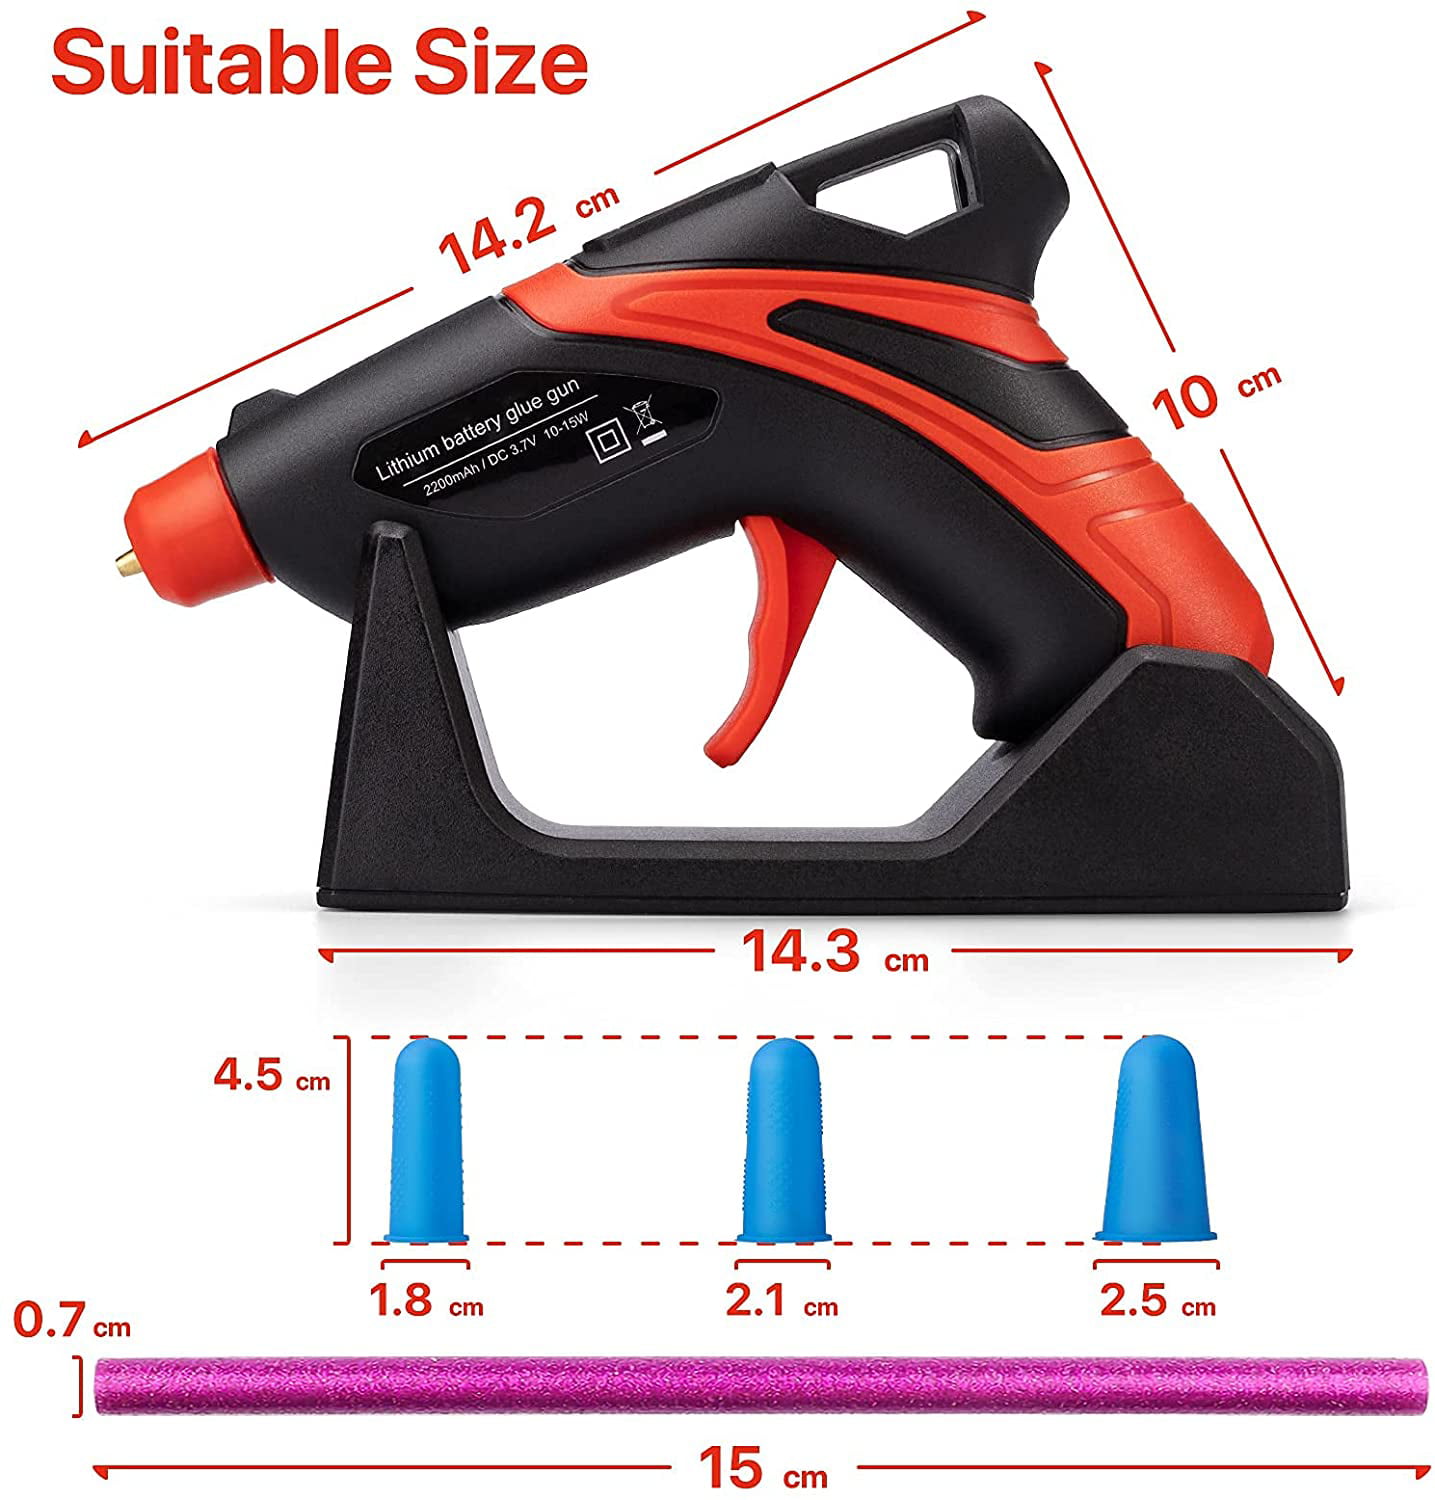 Cordless Glue Gun Hendoct USB Rechargeable Fast Preheating Wireless Mini  Glue Gun with 30pcs Hot Glue Sticks & 3 Finger Protectors for DIY Crafts